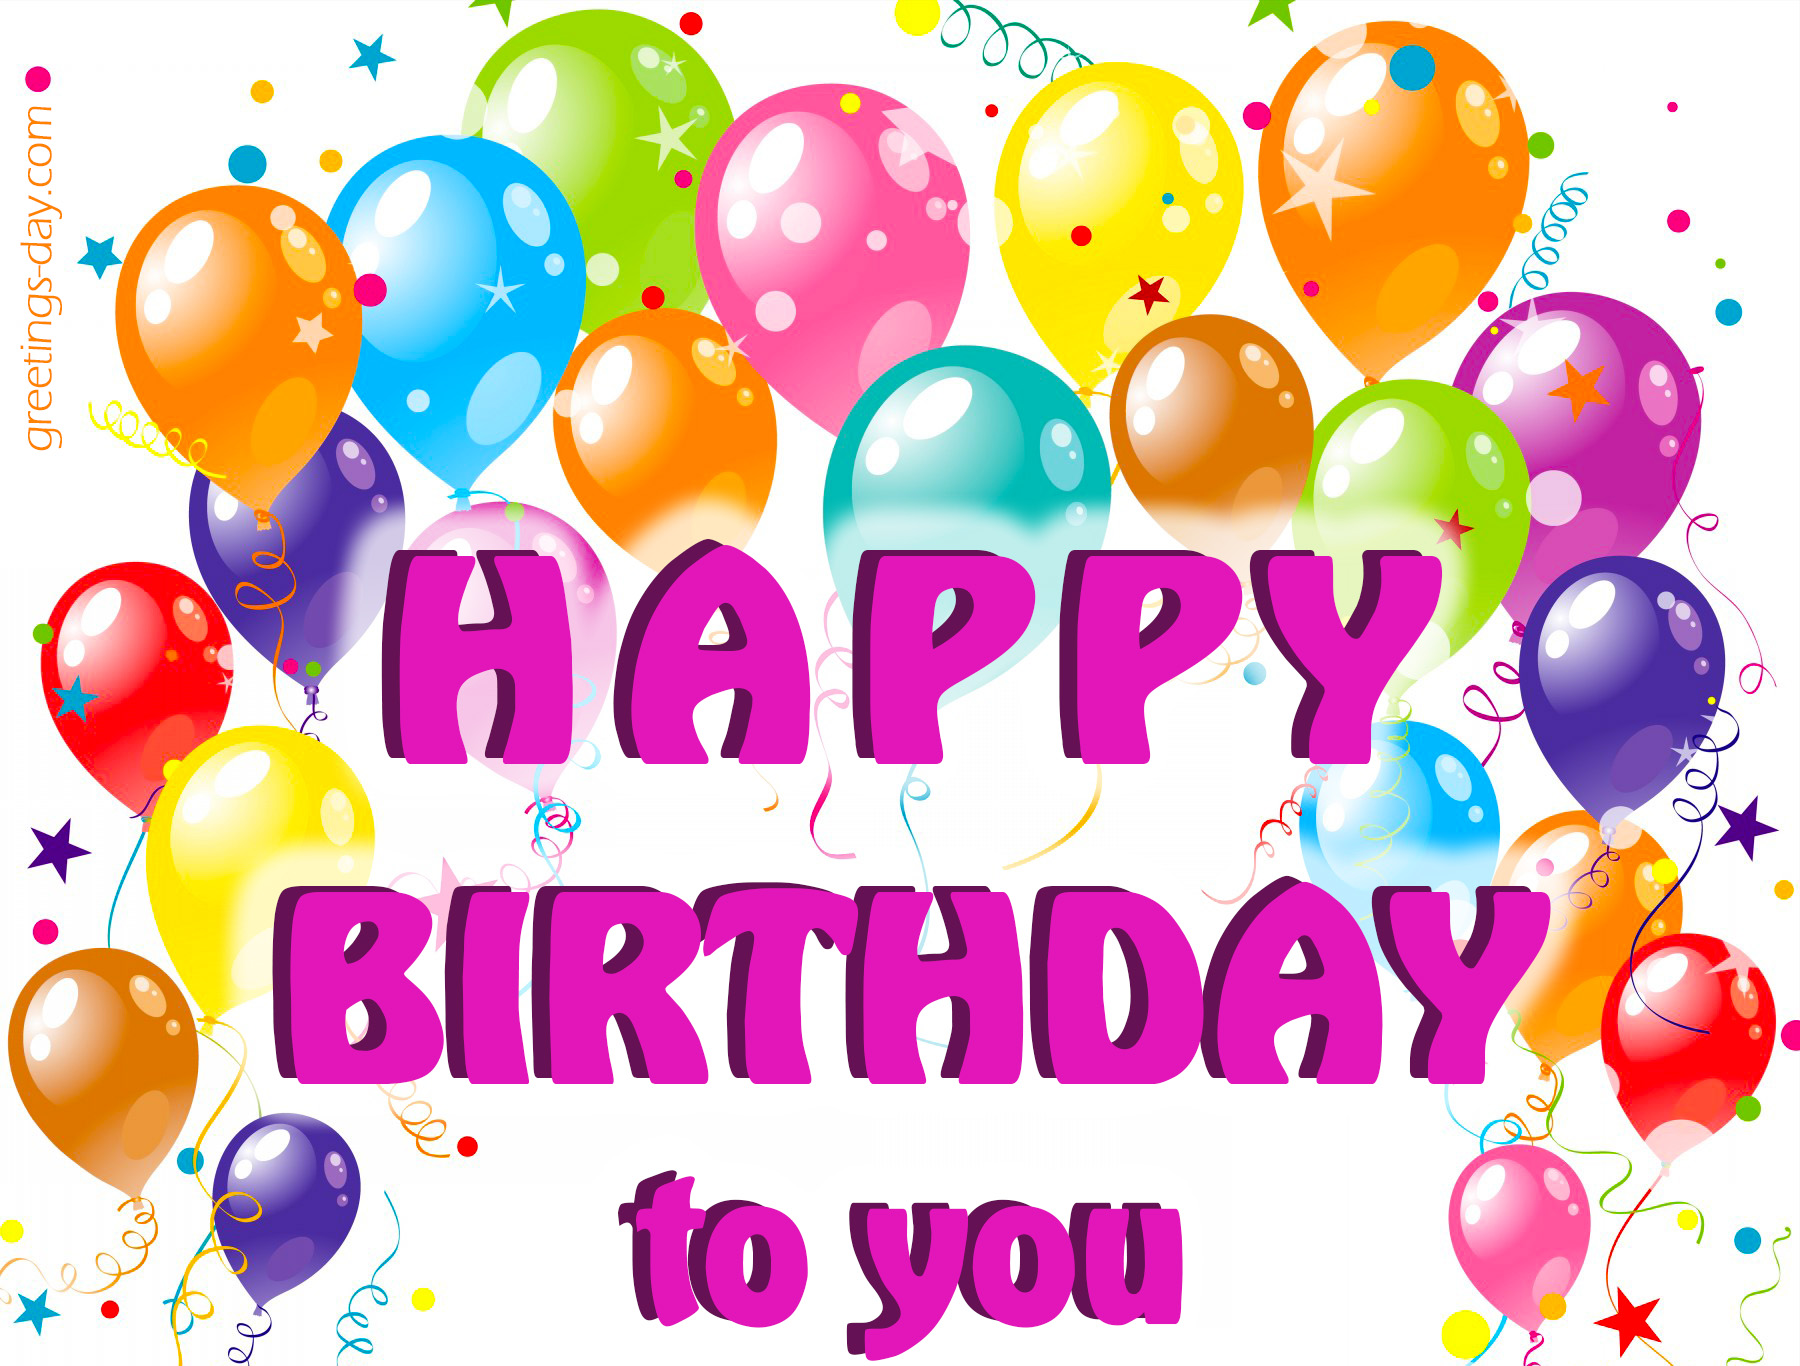 Greeting cards for every day: Happy Birthday to you - Free ...